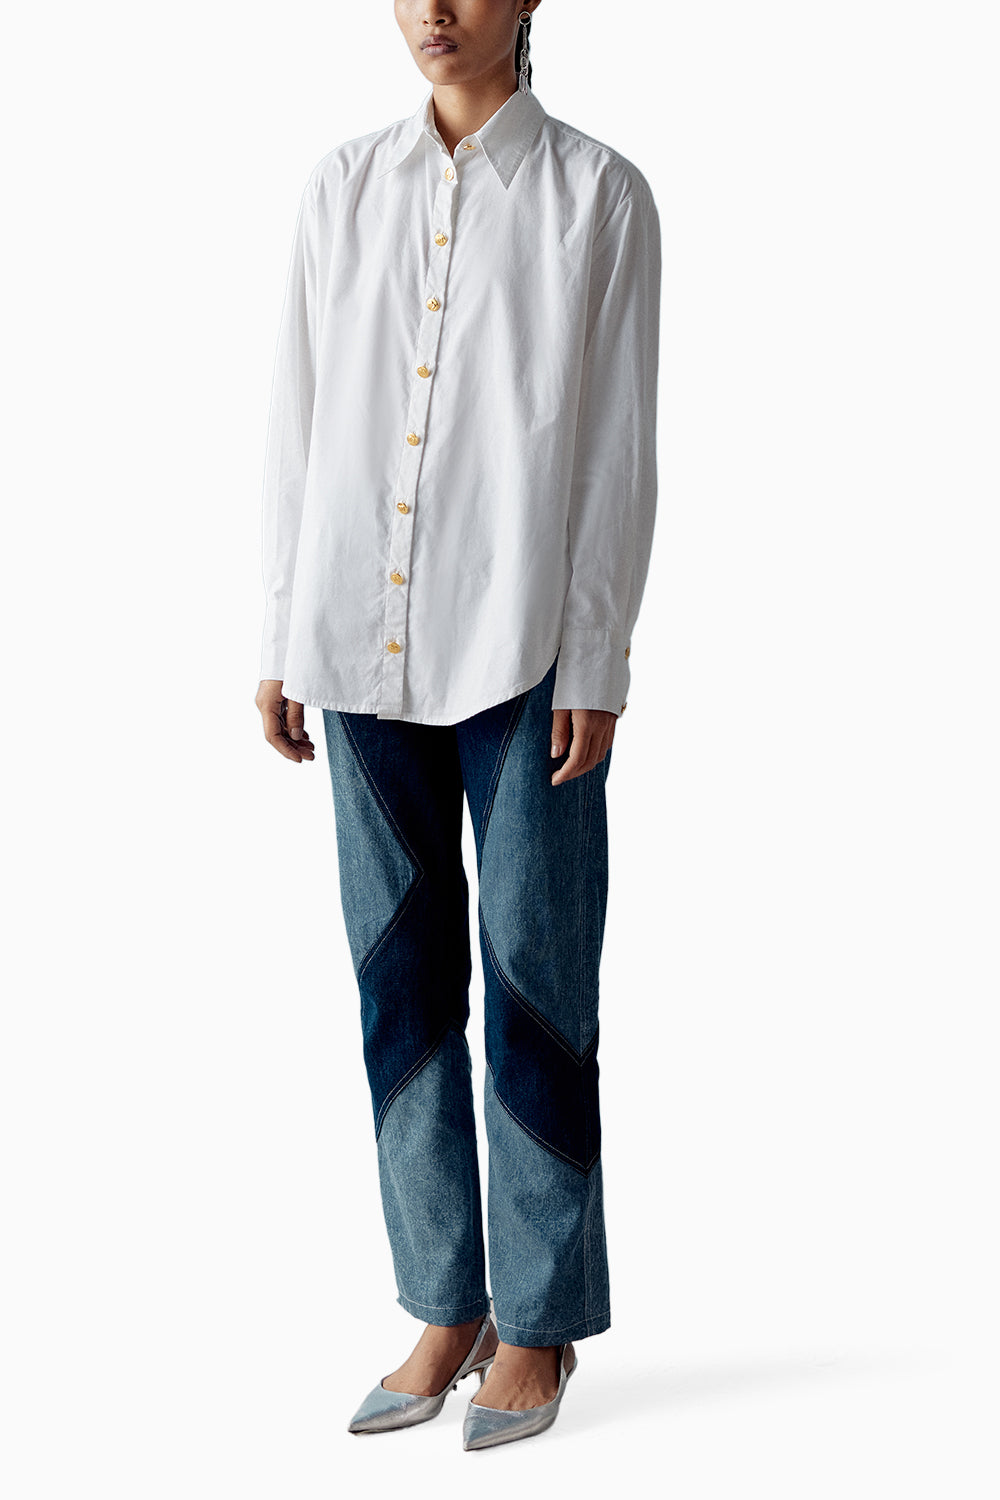 White Shirt with Metallic Buttons